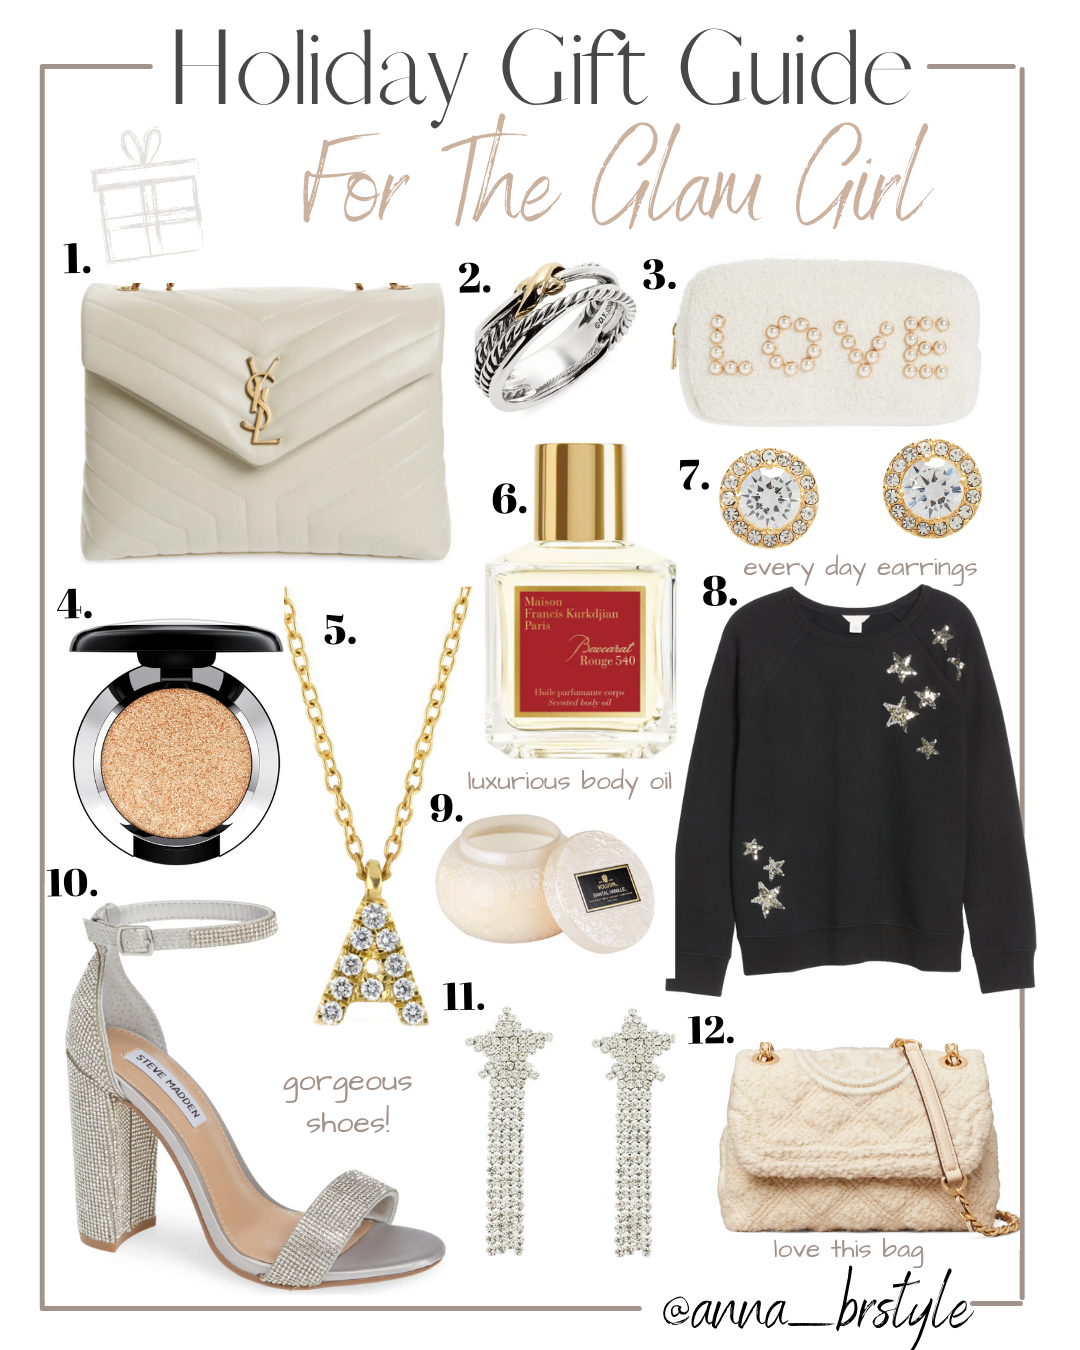 glam gift ideas for her